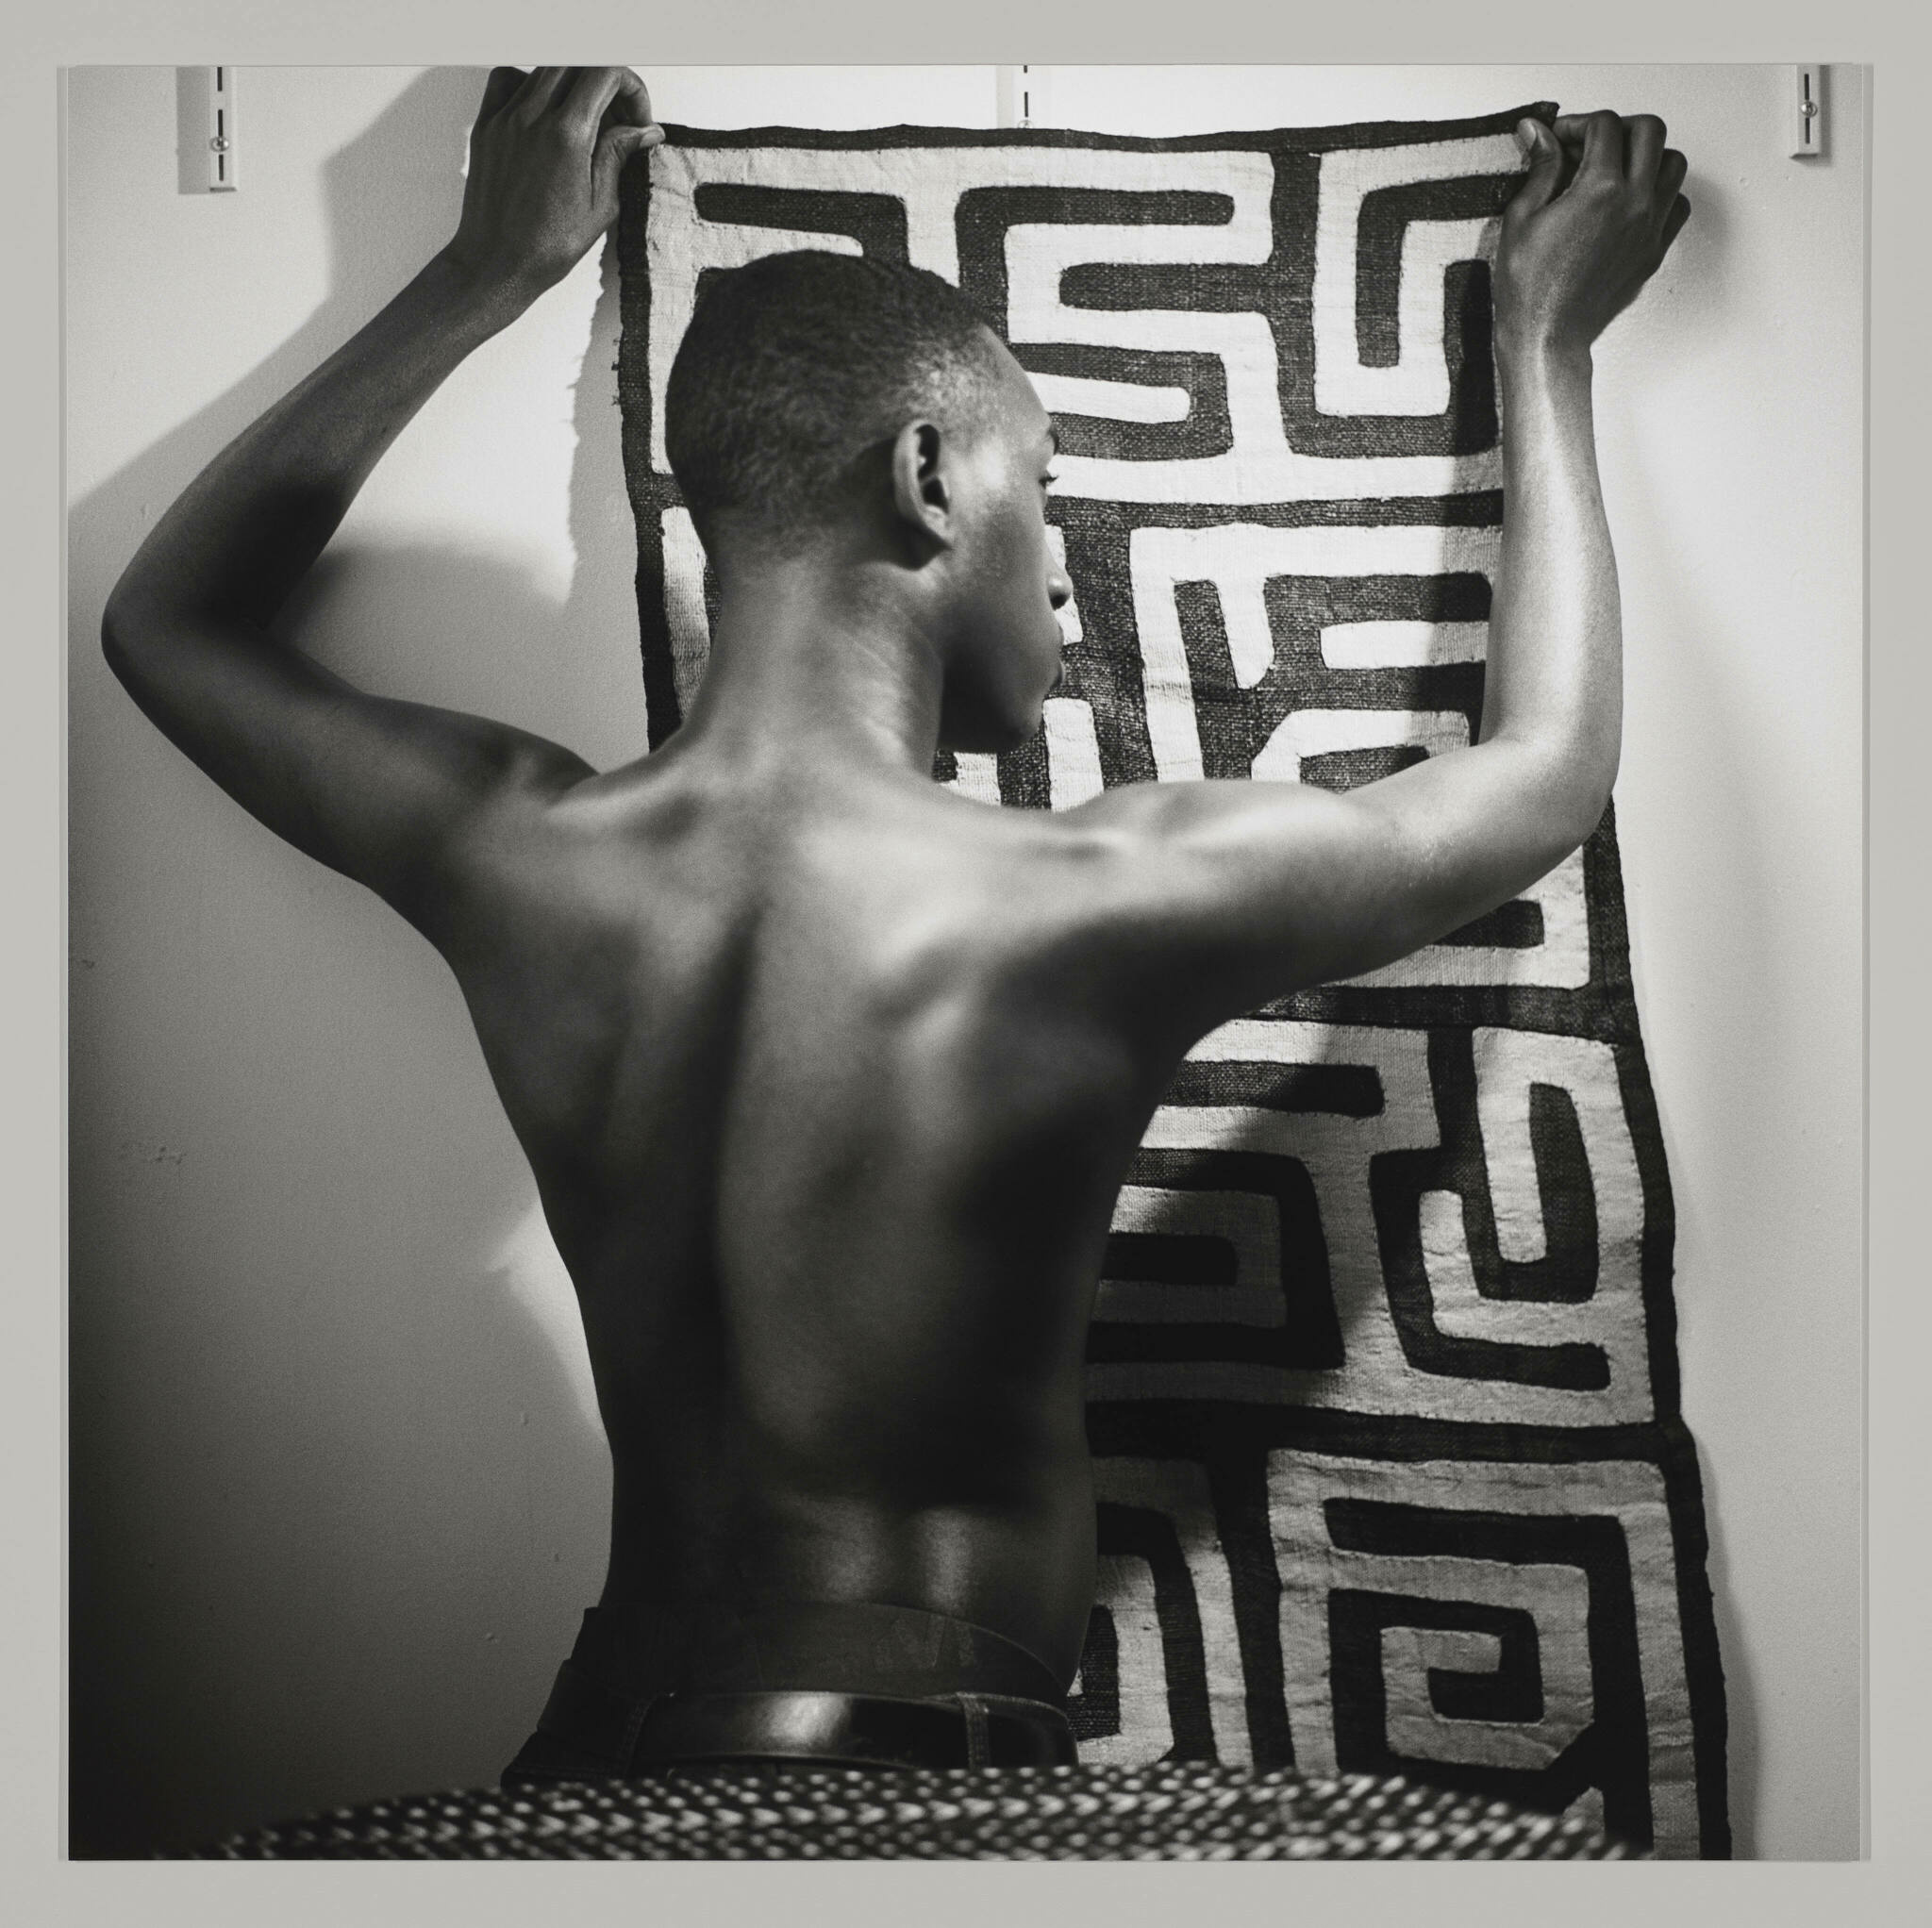 With their back to the camera, a shirtlless Black person with short hair holds a pattered cloth against a wall.